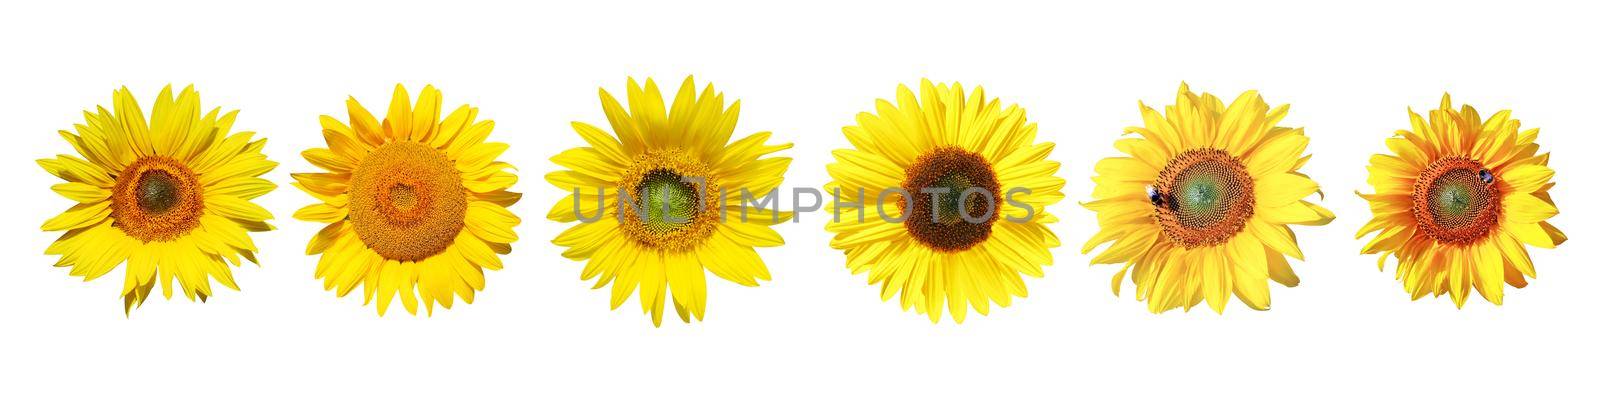 Flower of sunflower isolated on white background. by Taut